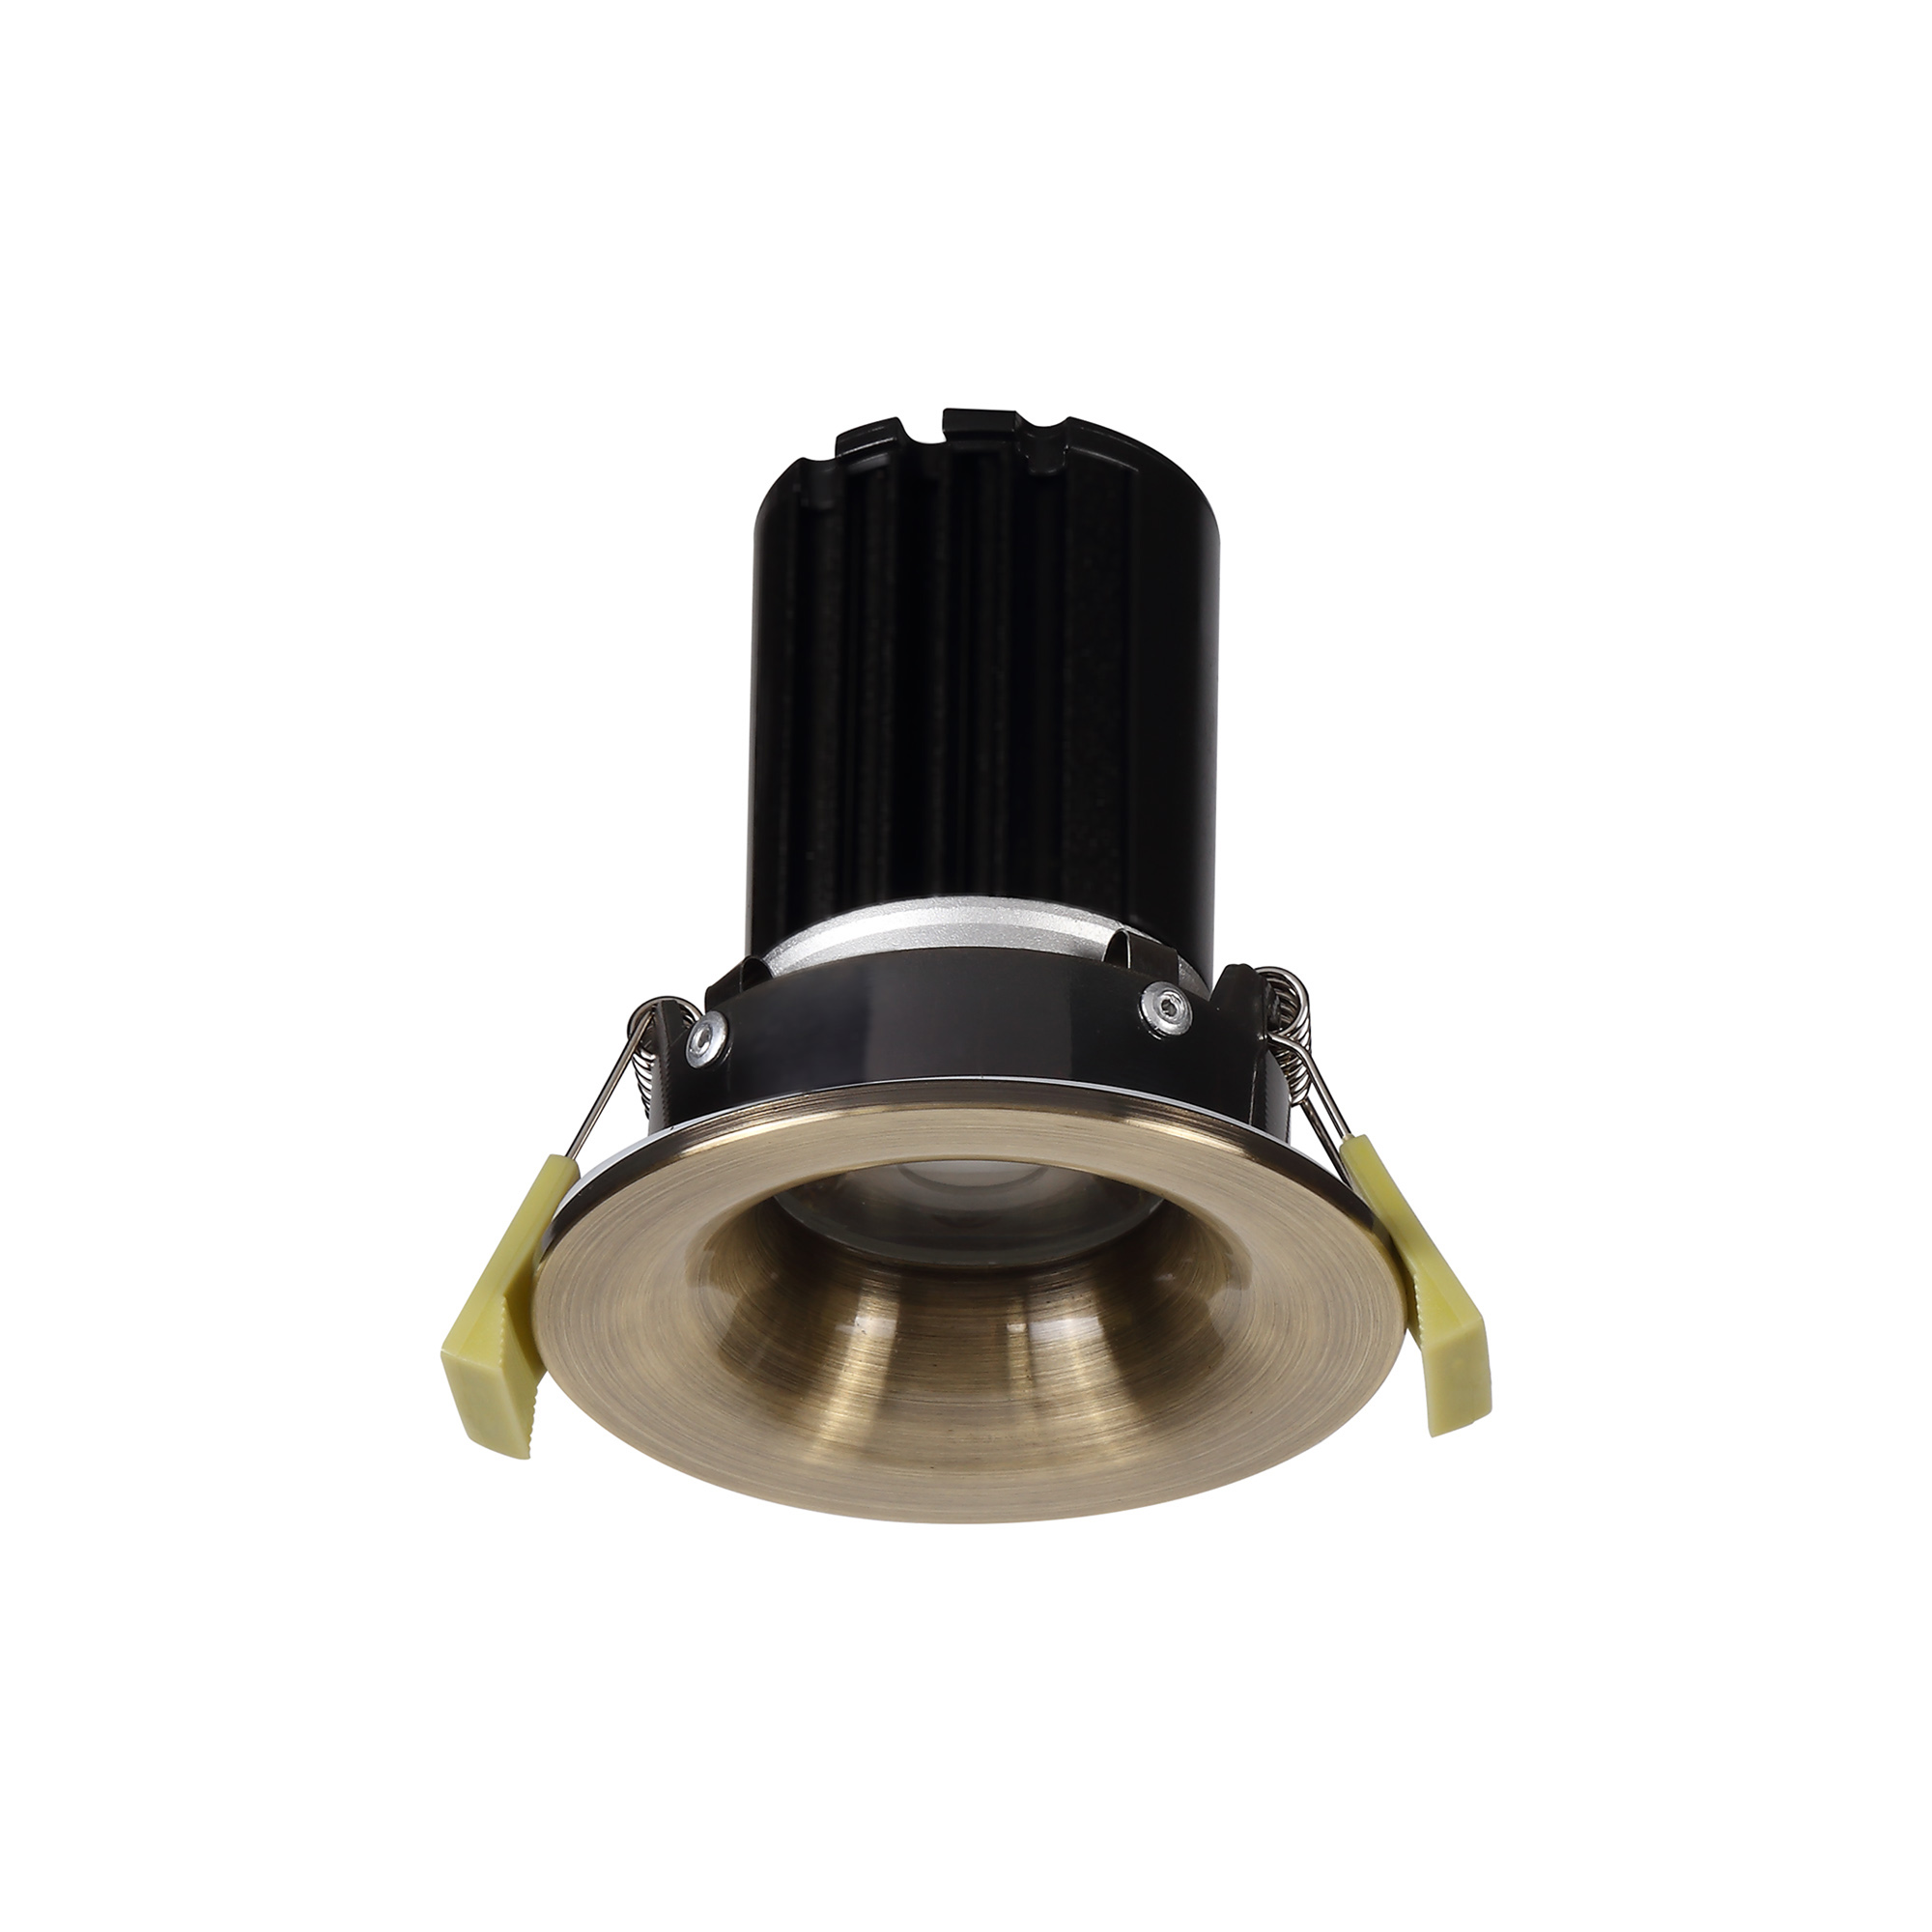 DM200790  Bruve 10 Tridonic powered 10W 2700K 750lm 12° CRI>90 LED Engine Antique Brass Fixed Round Recessed Downlight, Inner Glass cover, IP65